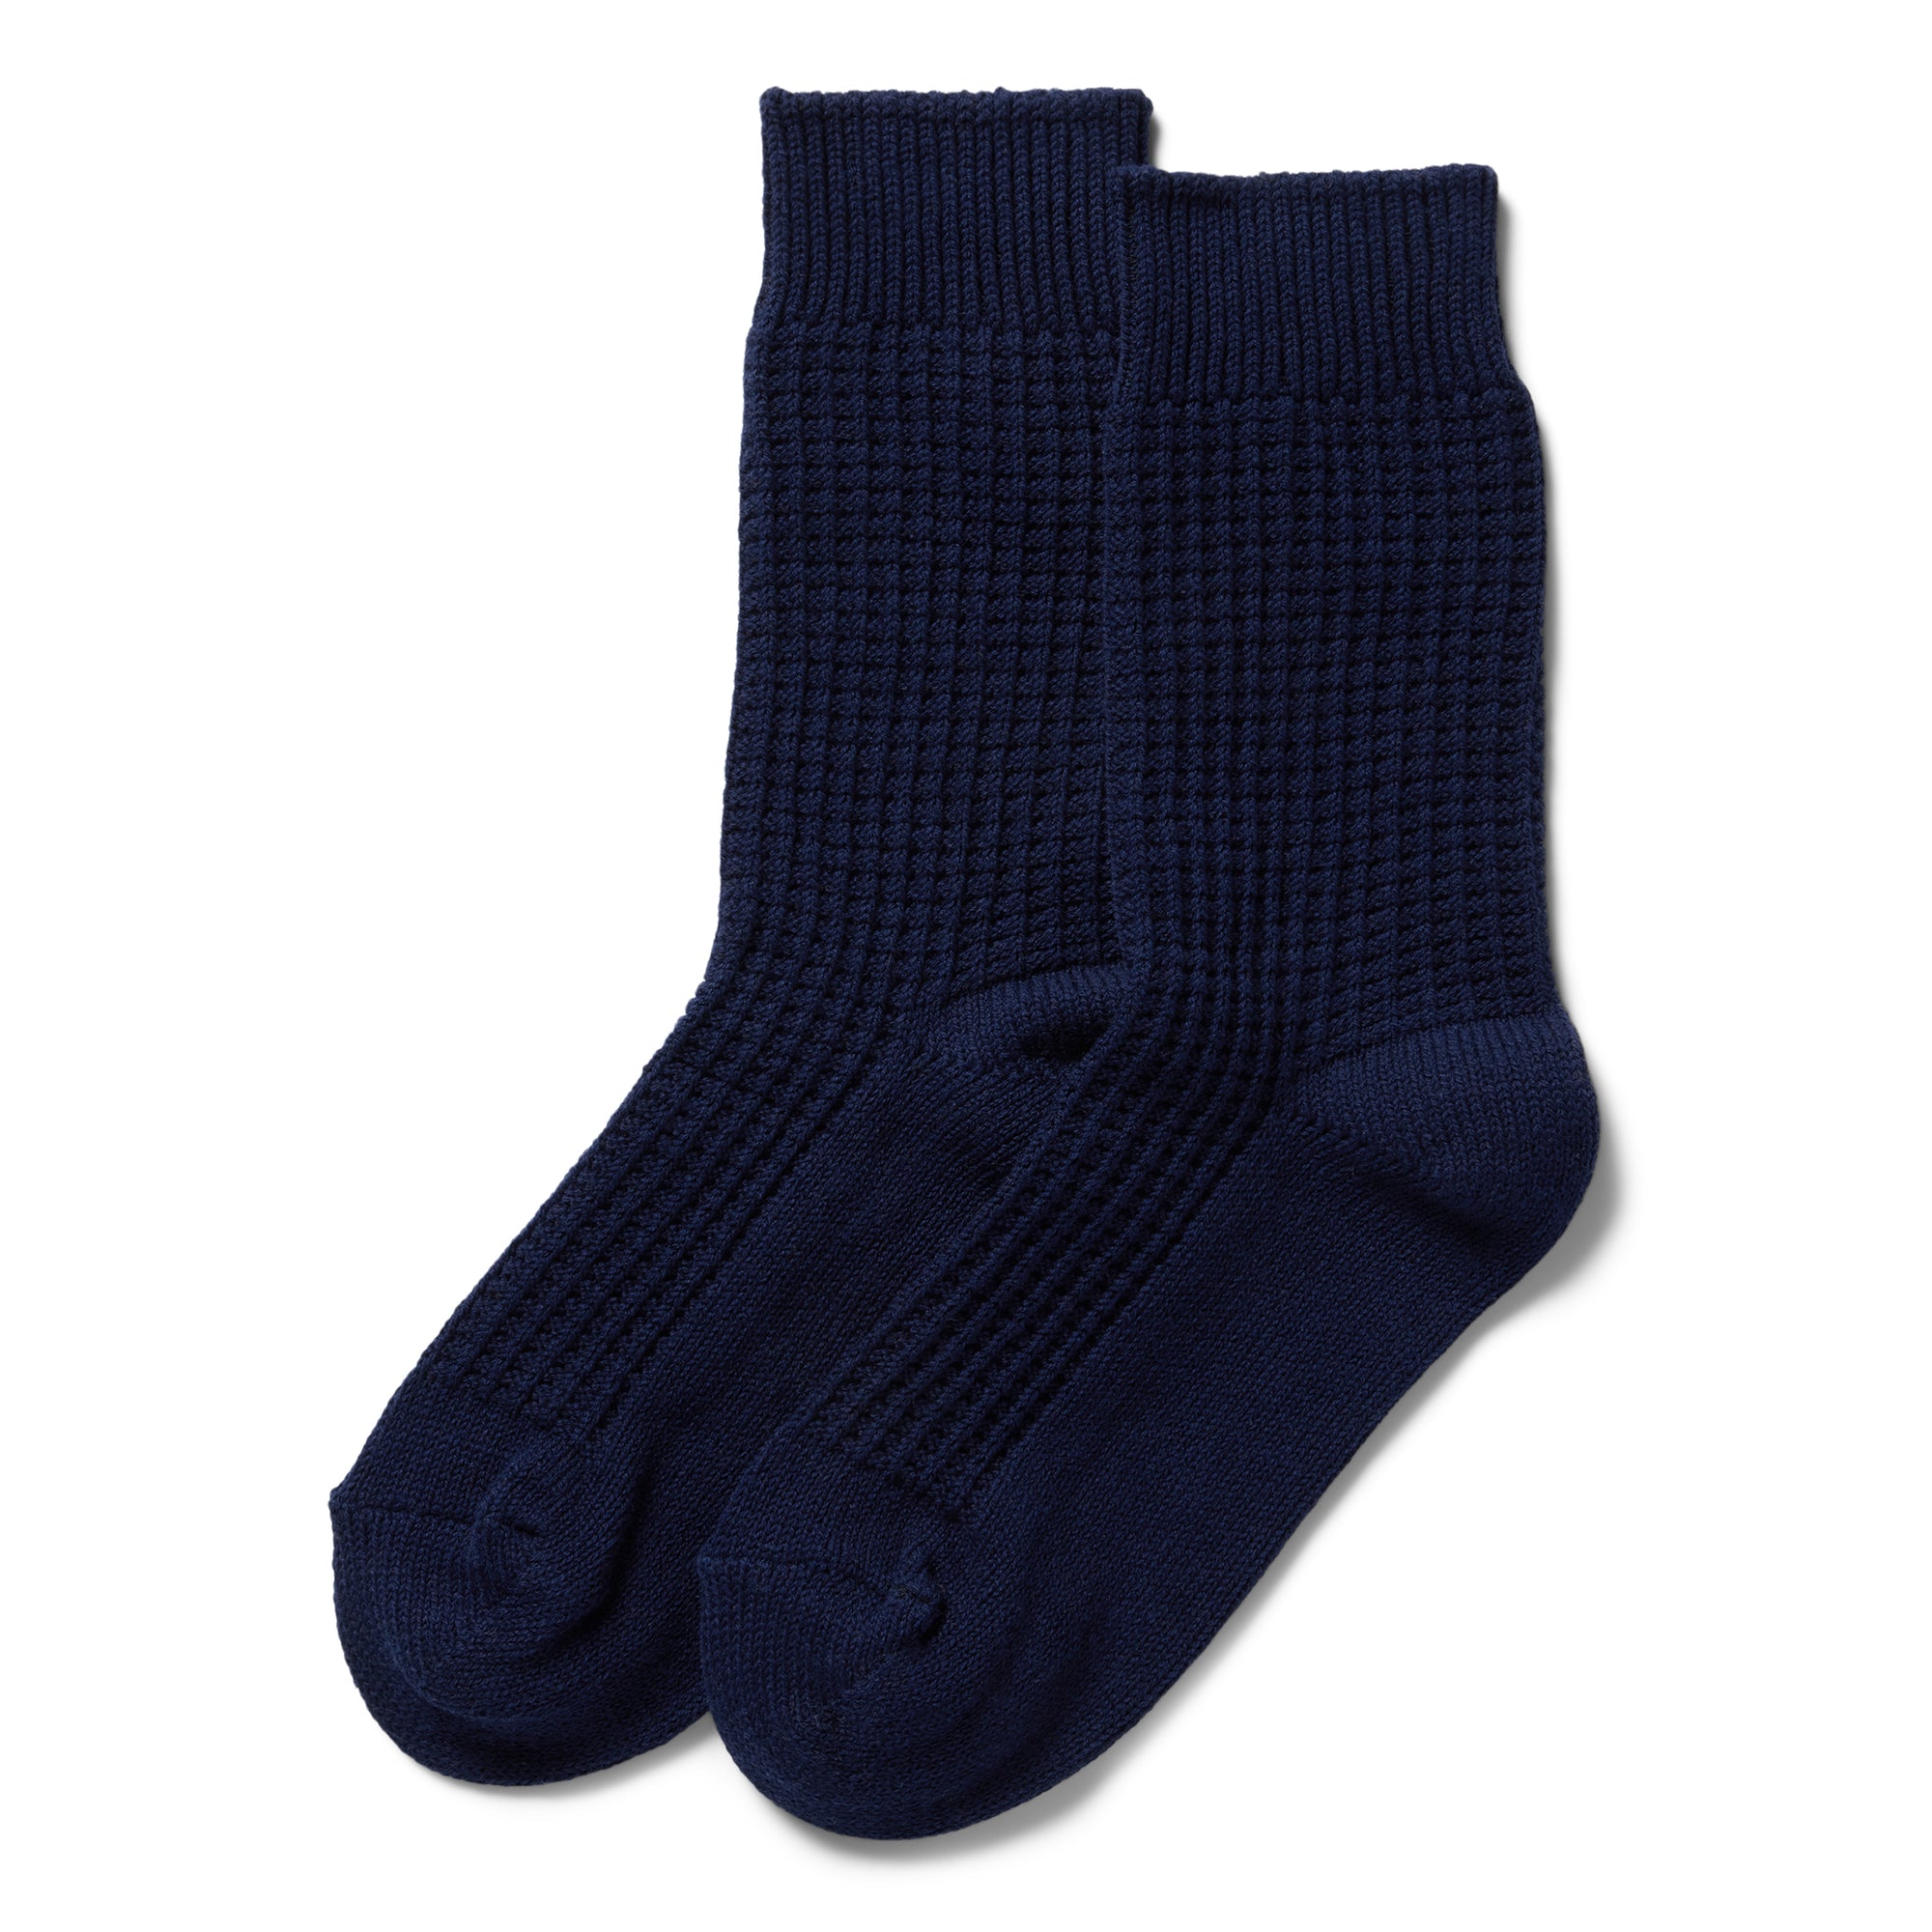 Taylor Stitch - The Waffle Sock in Navy